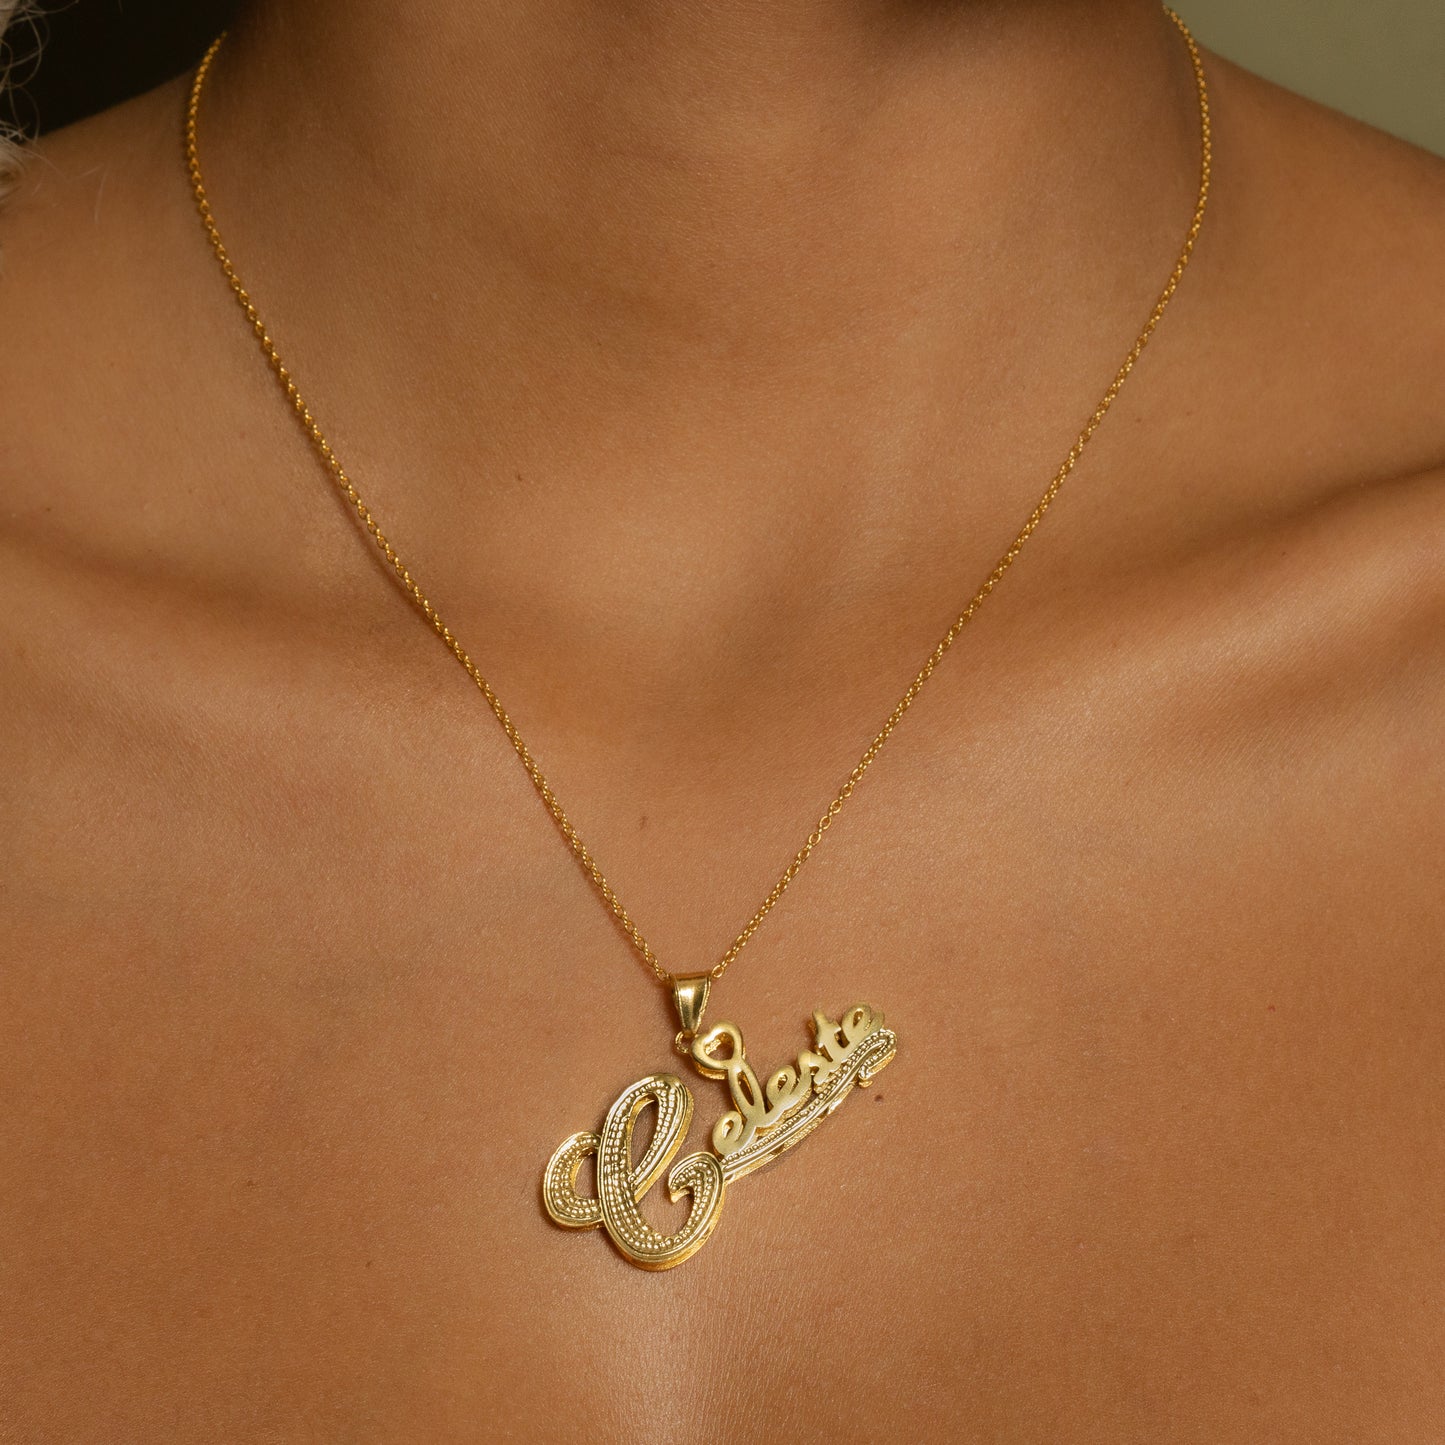 The Golden Swift Double Plated Name Necklace